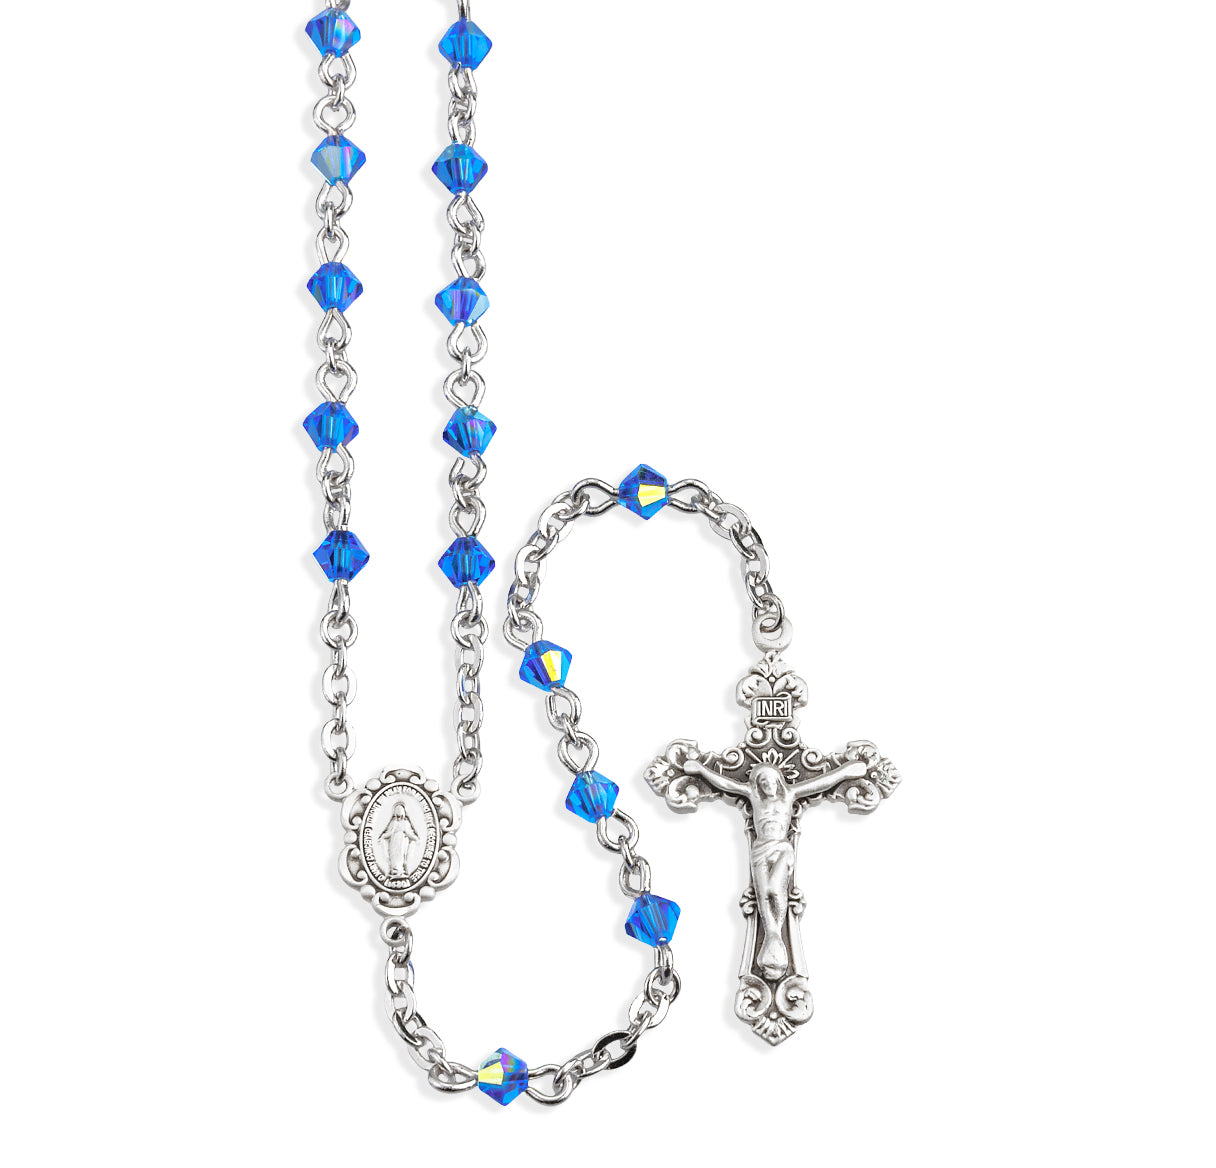 Rosary Sterling Crucifix and Centerpiece Created with Swarovski Crystal 4mm Faceted Tin Cut Bicone Beads in Sapphire by HMH